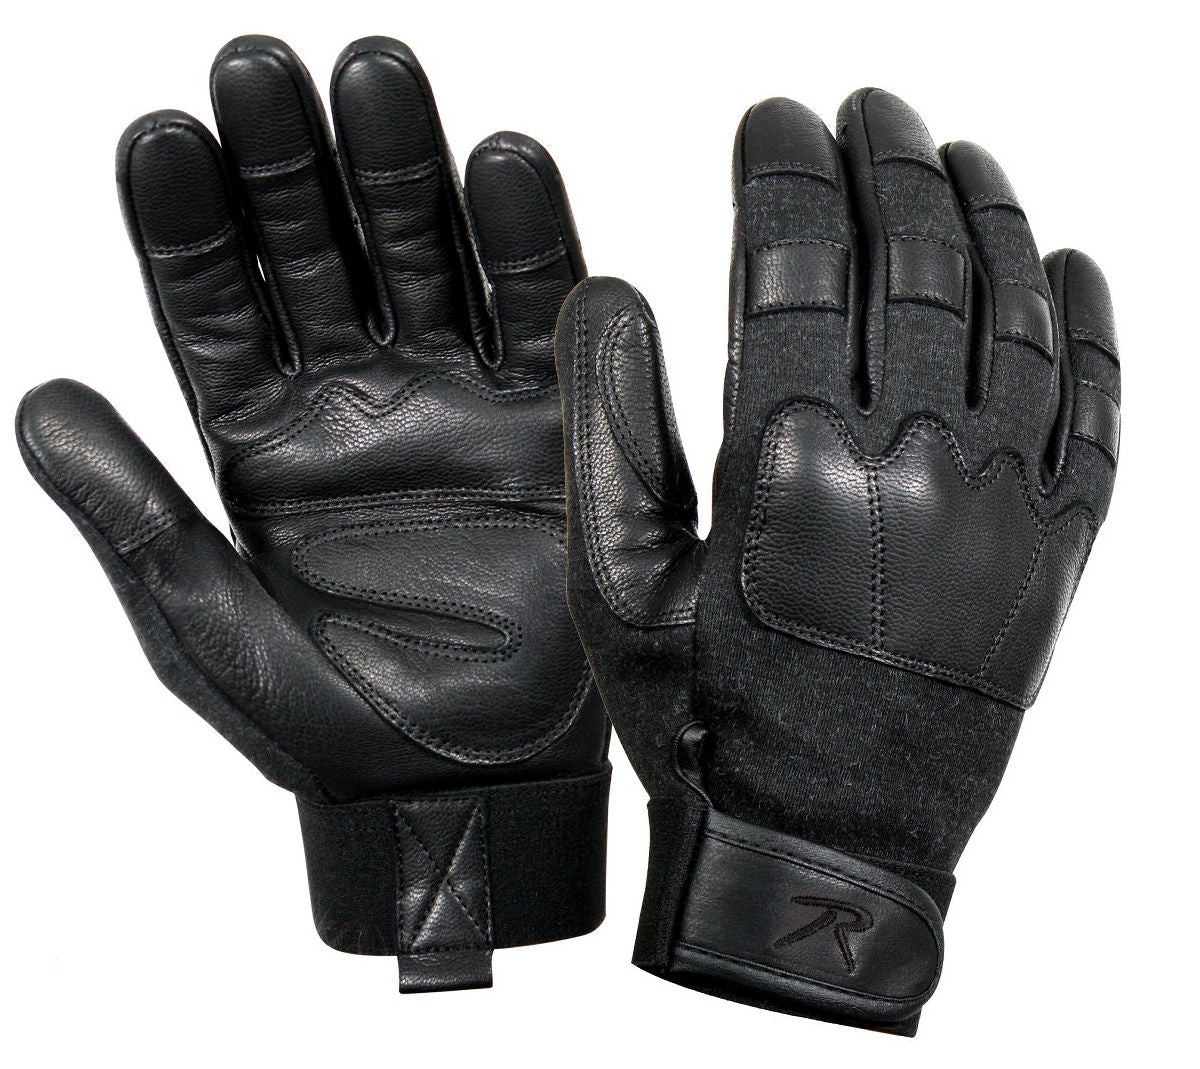 Rothco Fire & Cut Resistant Tactical Gloves